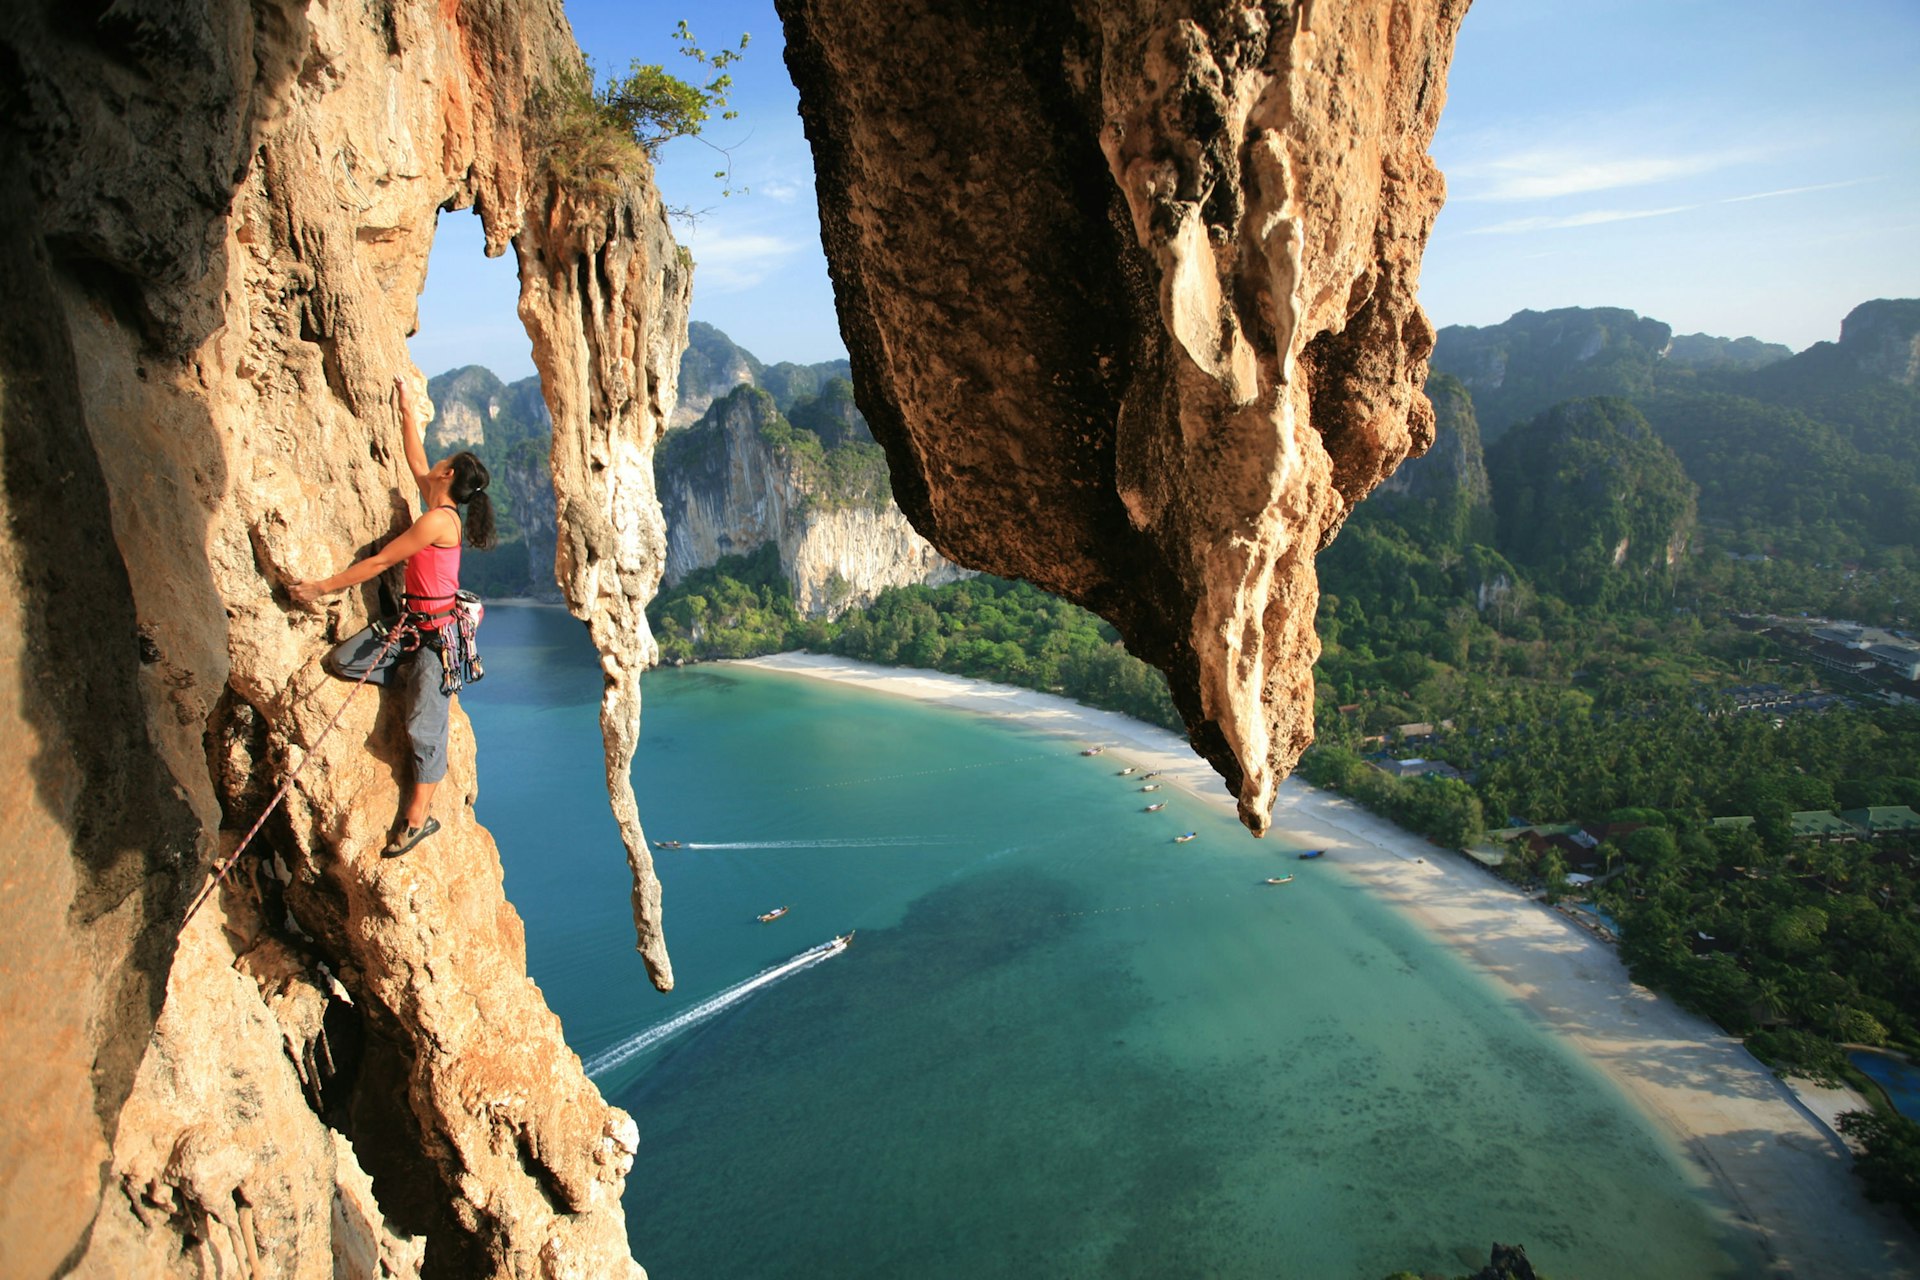 A climber on cliffs high above the sea in Thailand